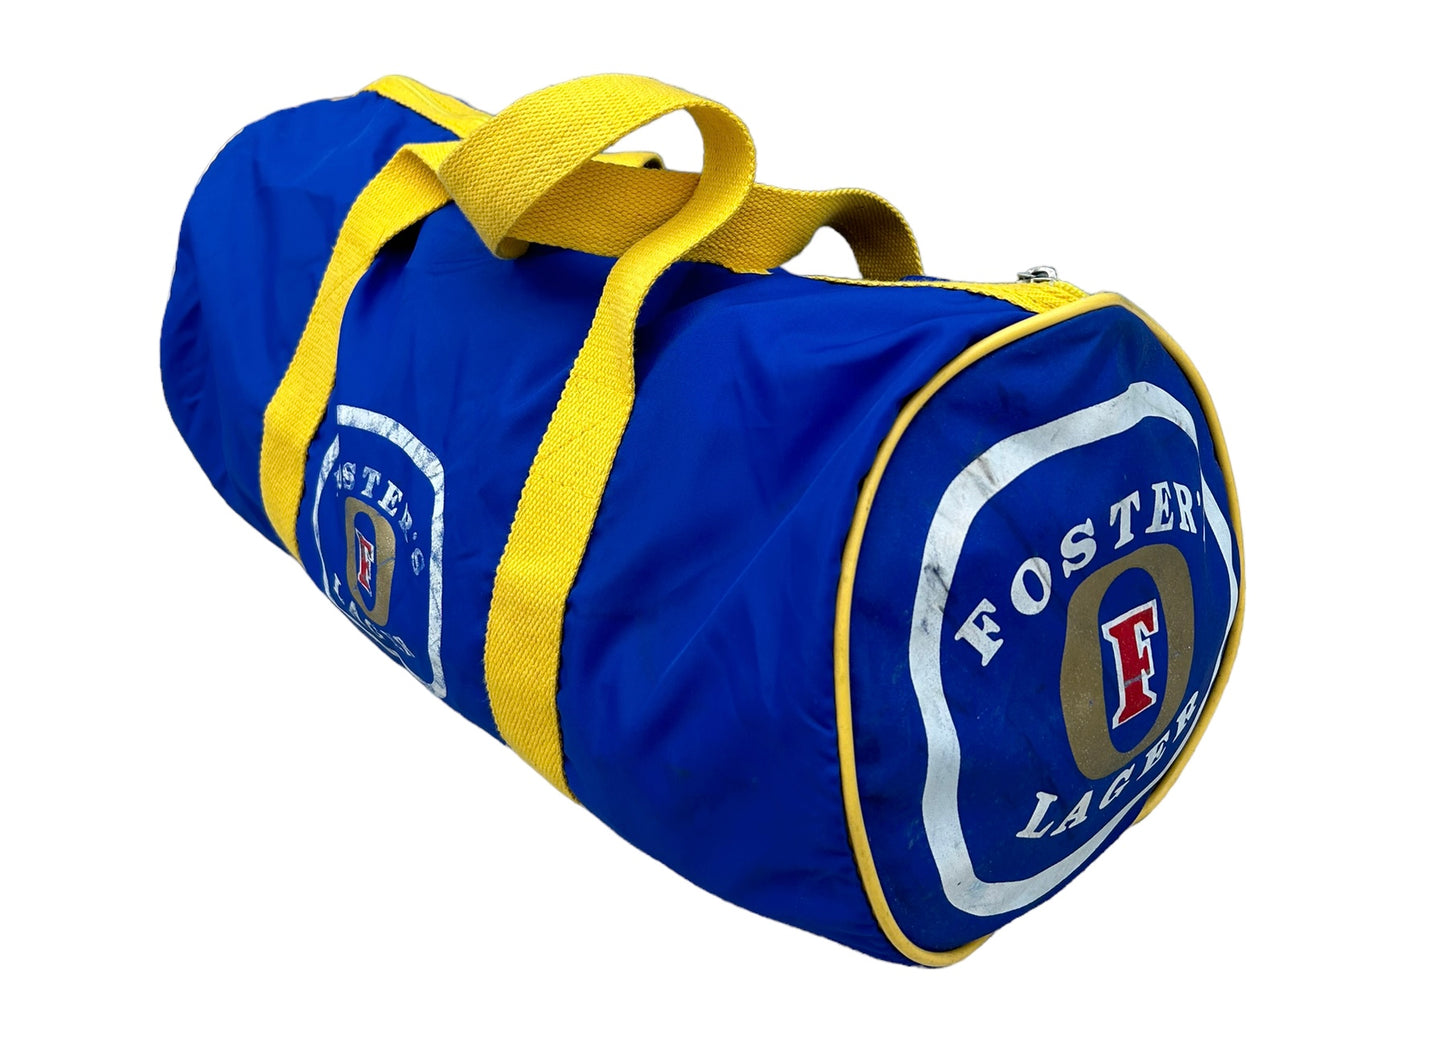 Vintage Fosters Lager Mini Duffle Bag